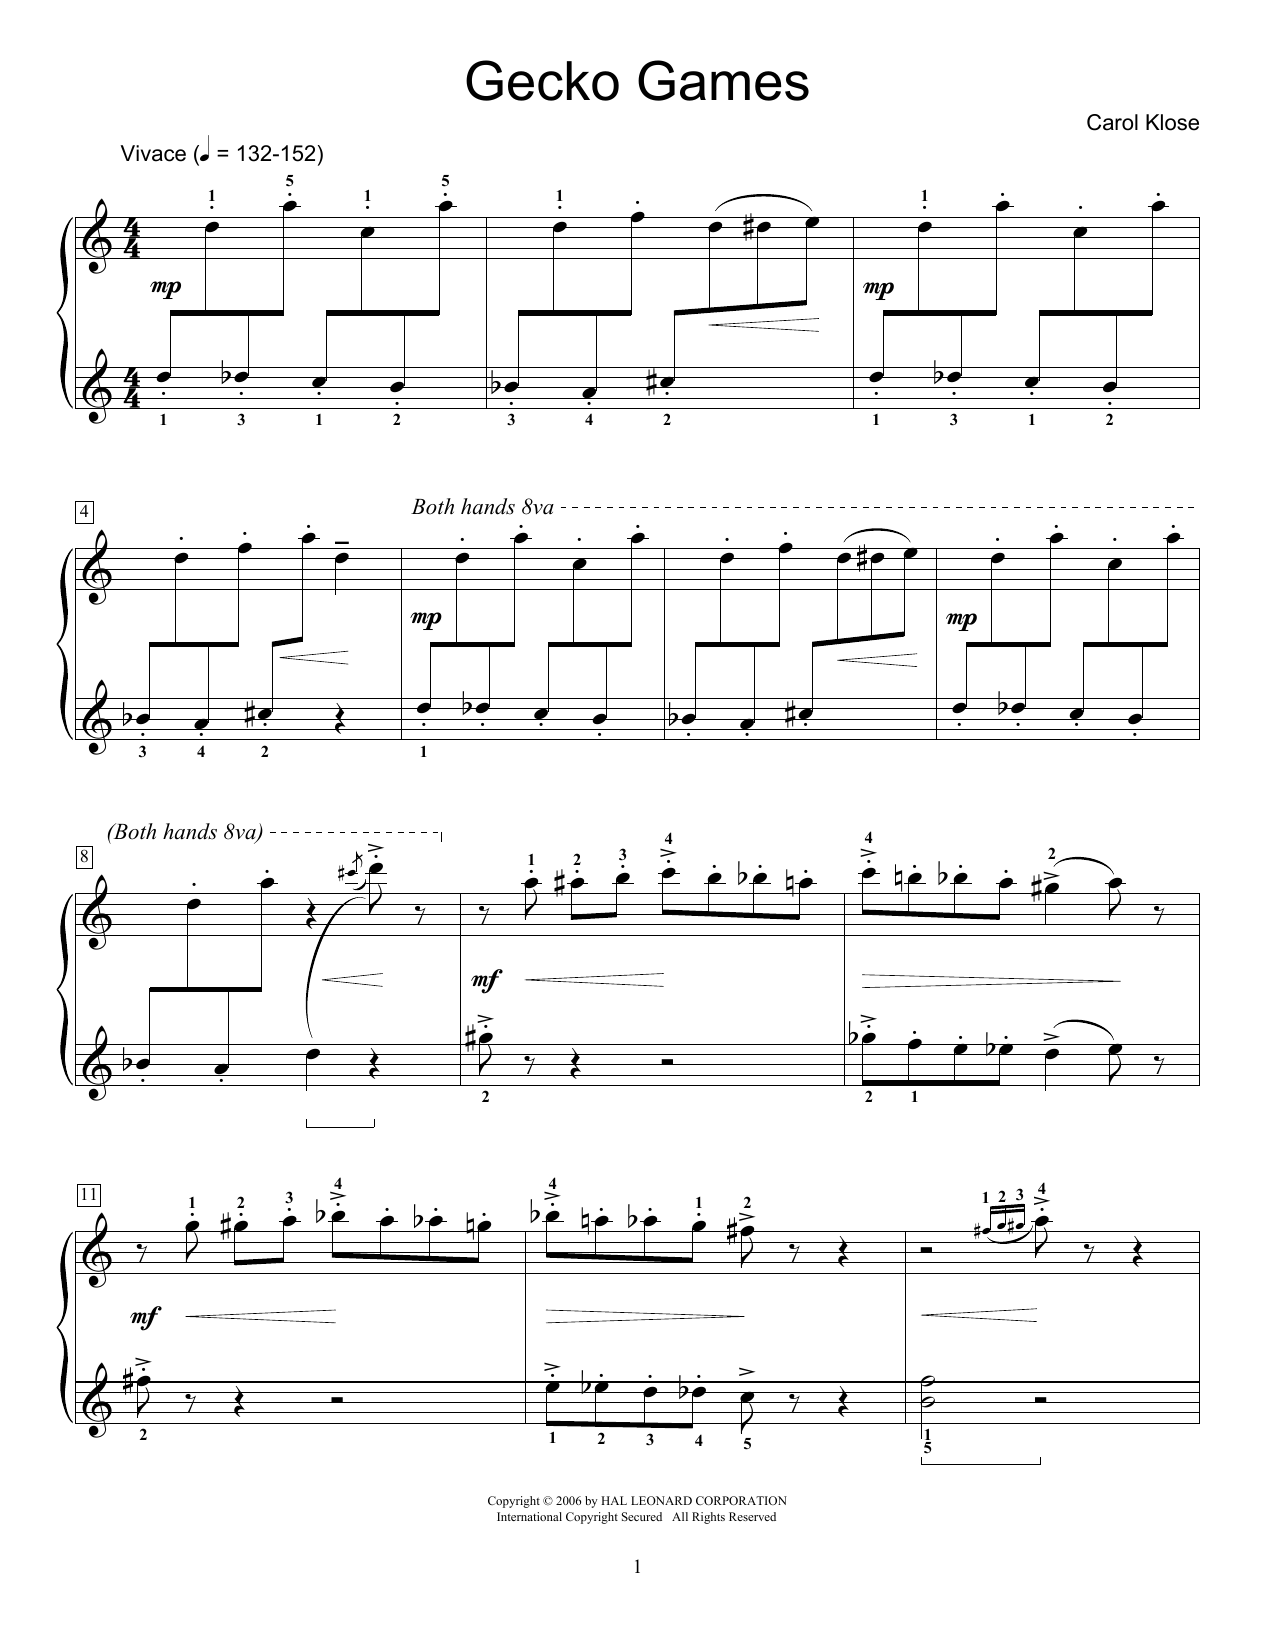 Download Carol Klose Gecko Games sheet music and printable PDF score & Easy Listening music notes